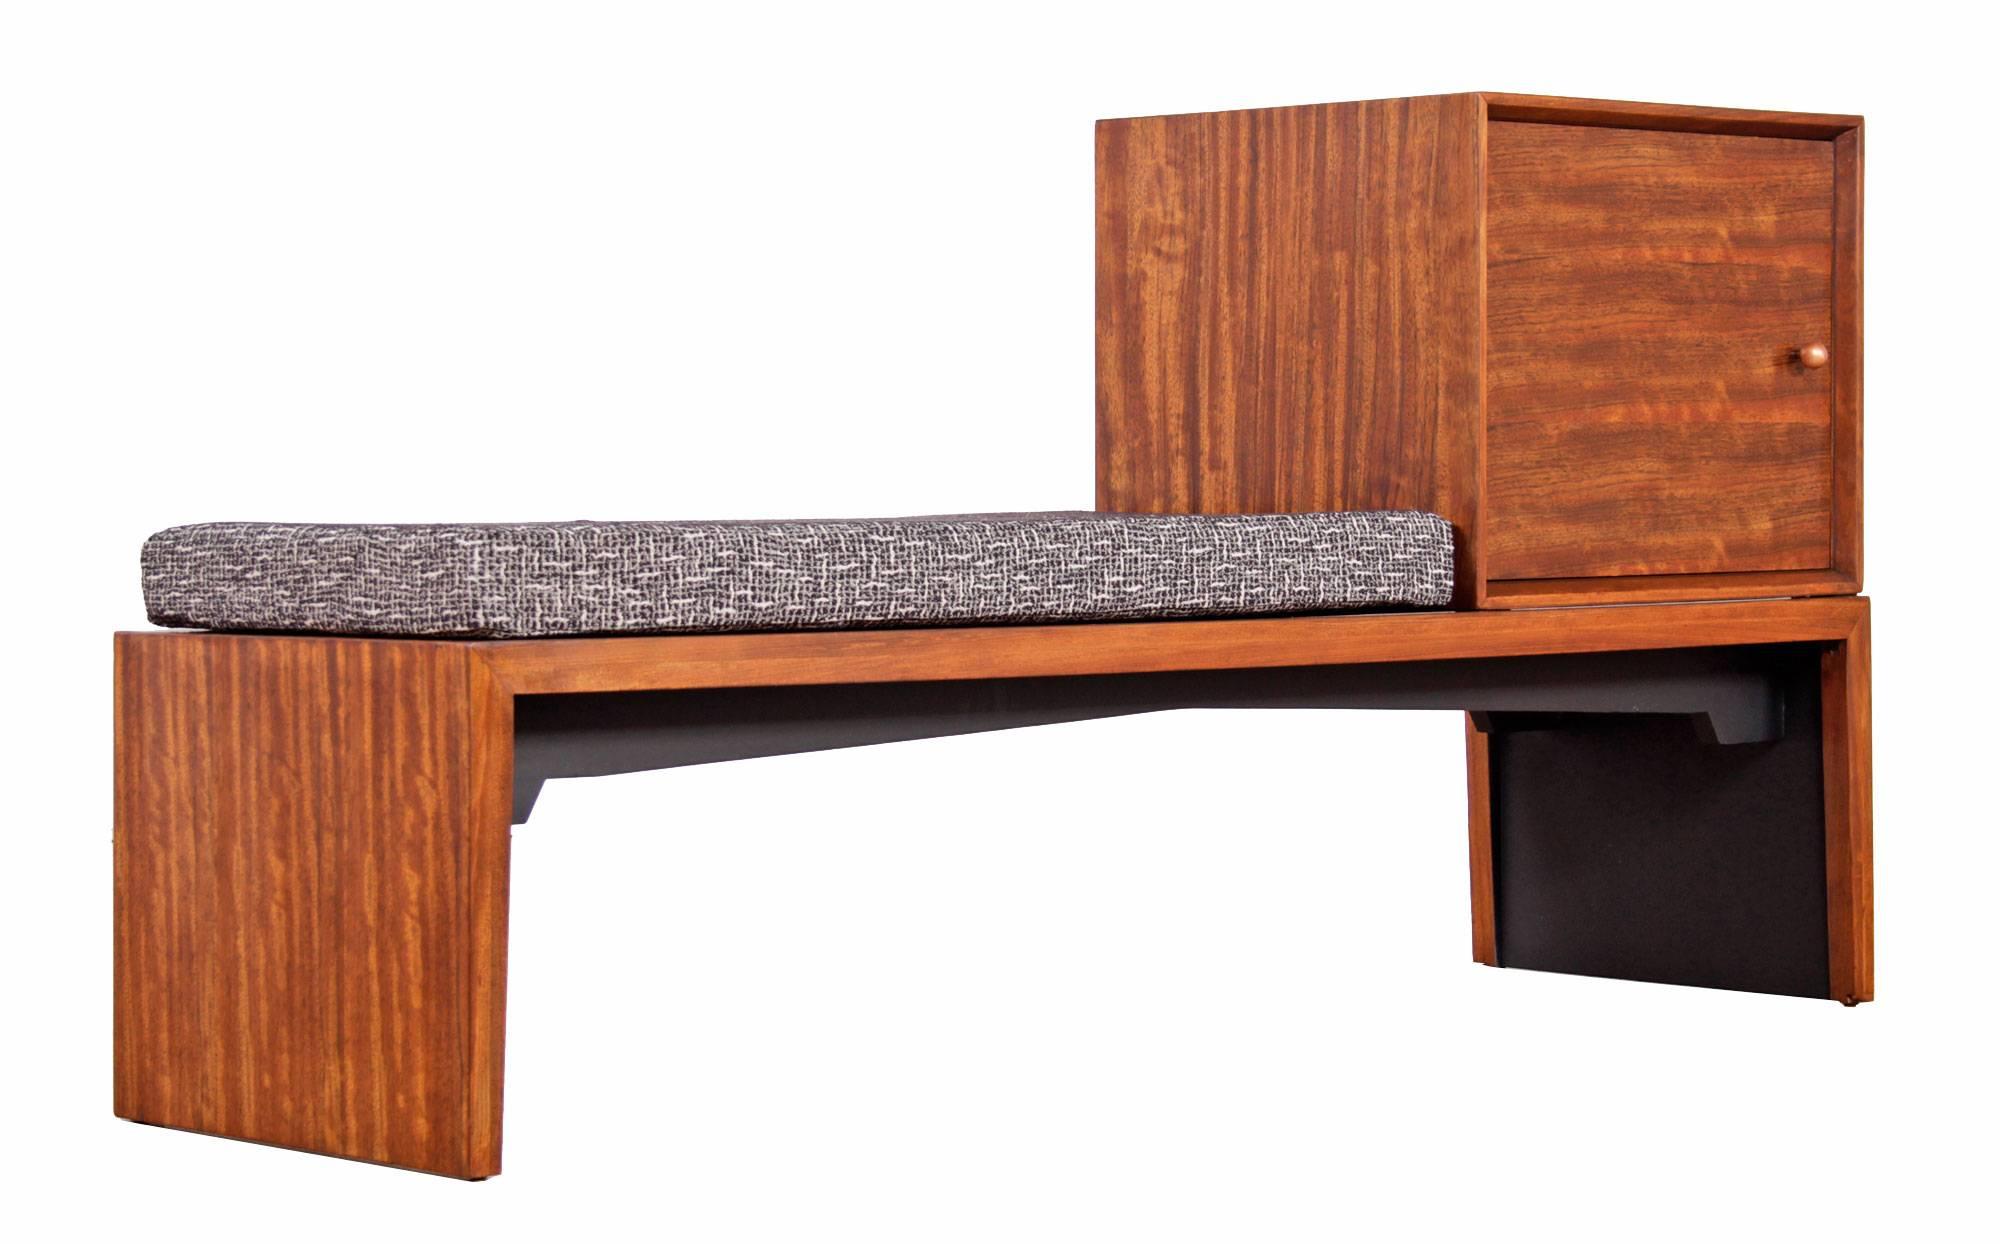 Restored Mid-Century Modern modular bench with storage by Milo Baughman for Drexel Perspective. The unit has been professionally restored with a newly refinished Mindoro wood and cushion with new foam and upholstery. Opt to use the bench as pictured